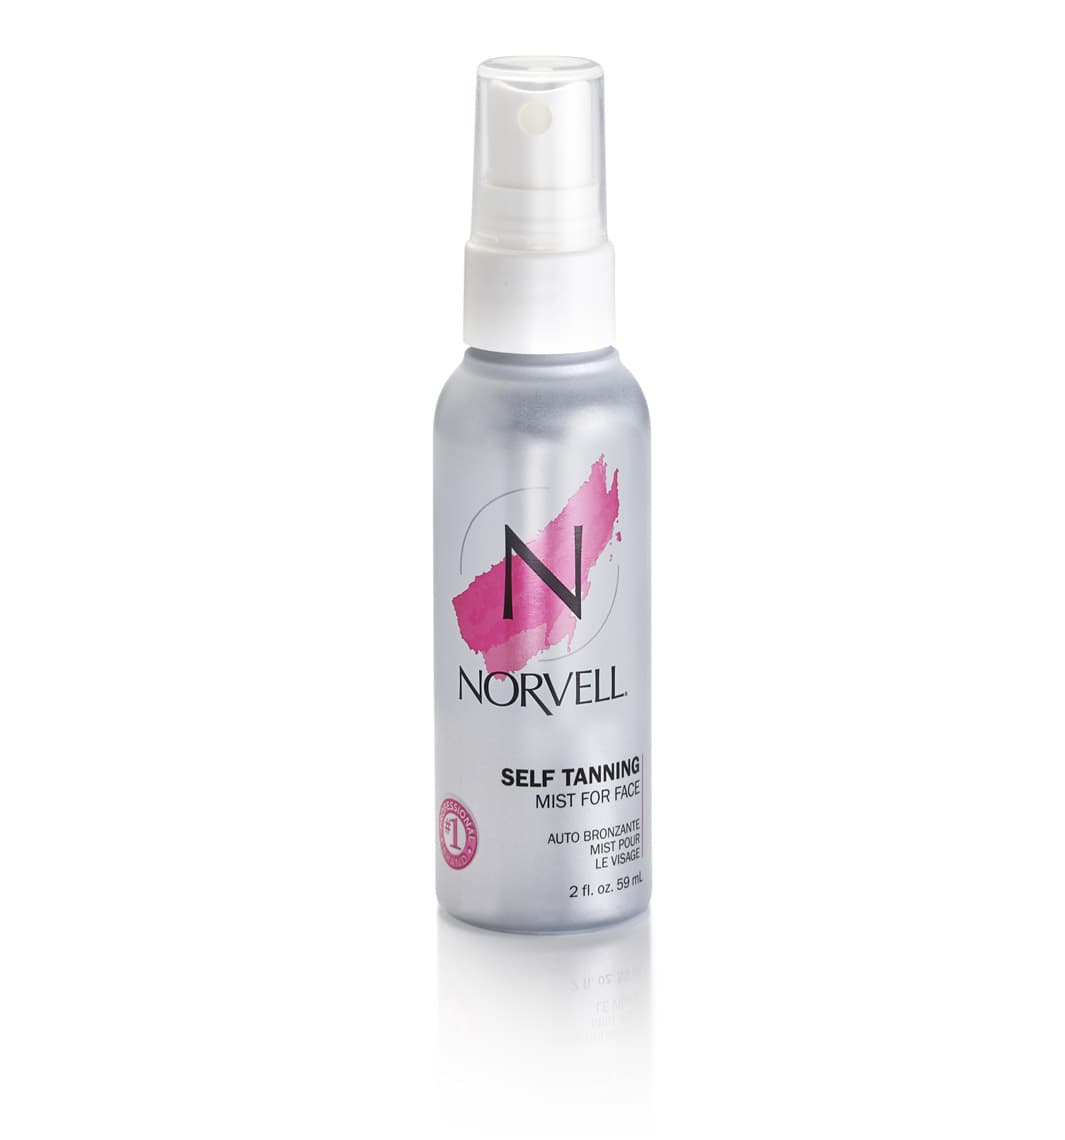 Norvell Self Tanning Mist For Face